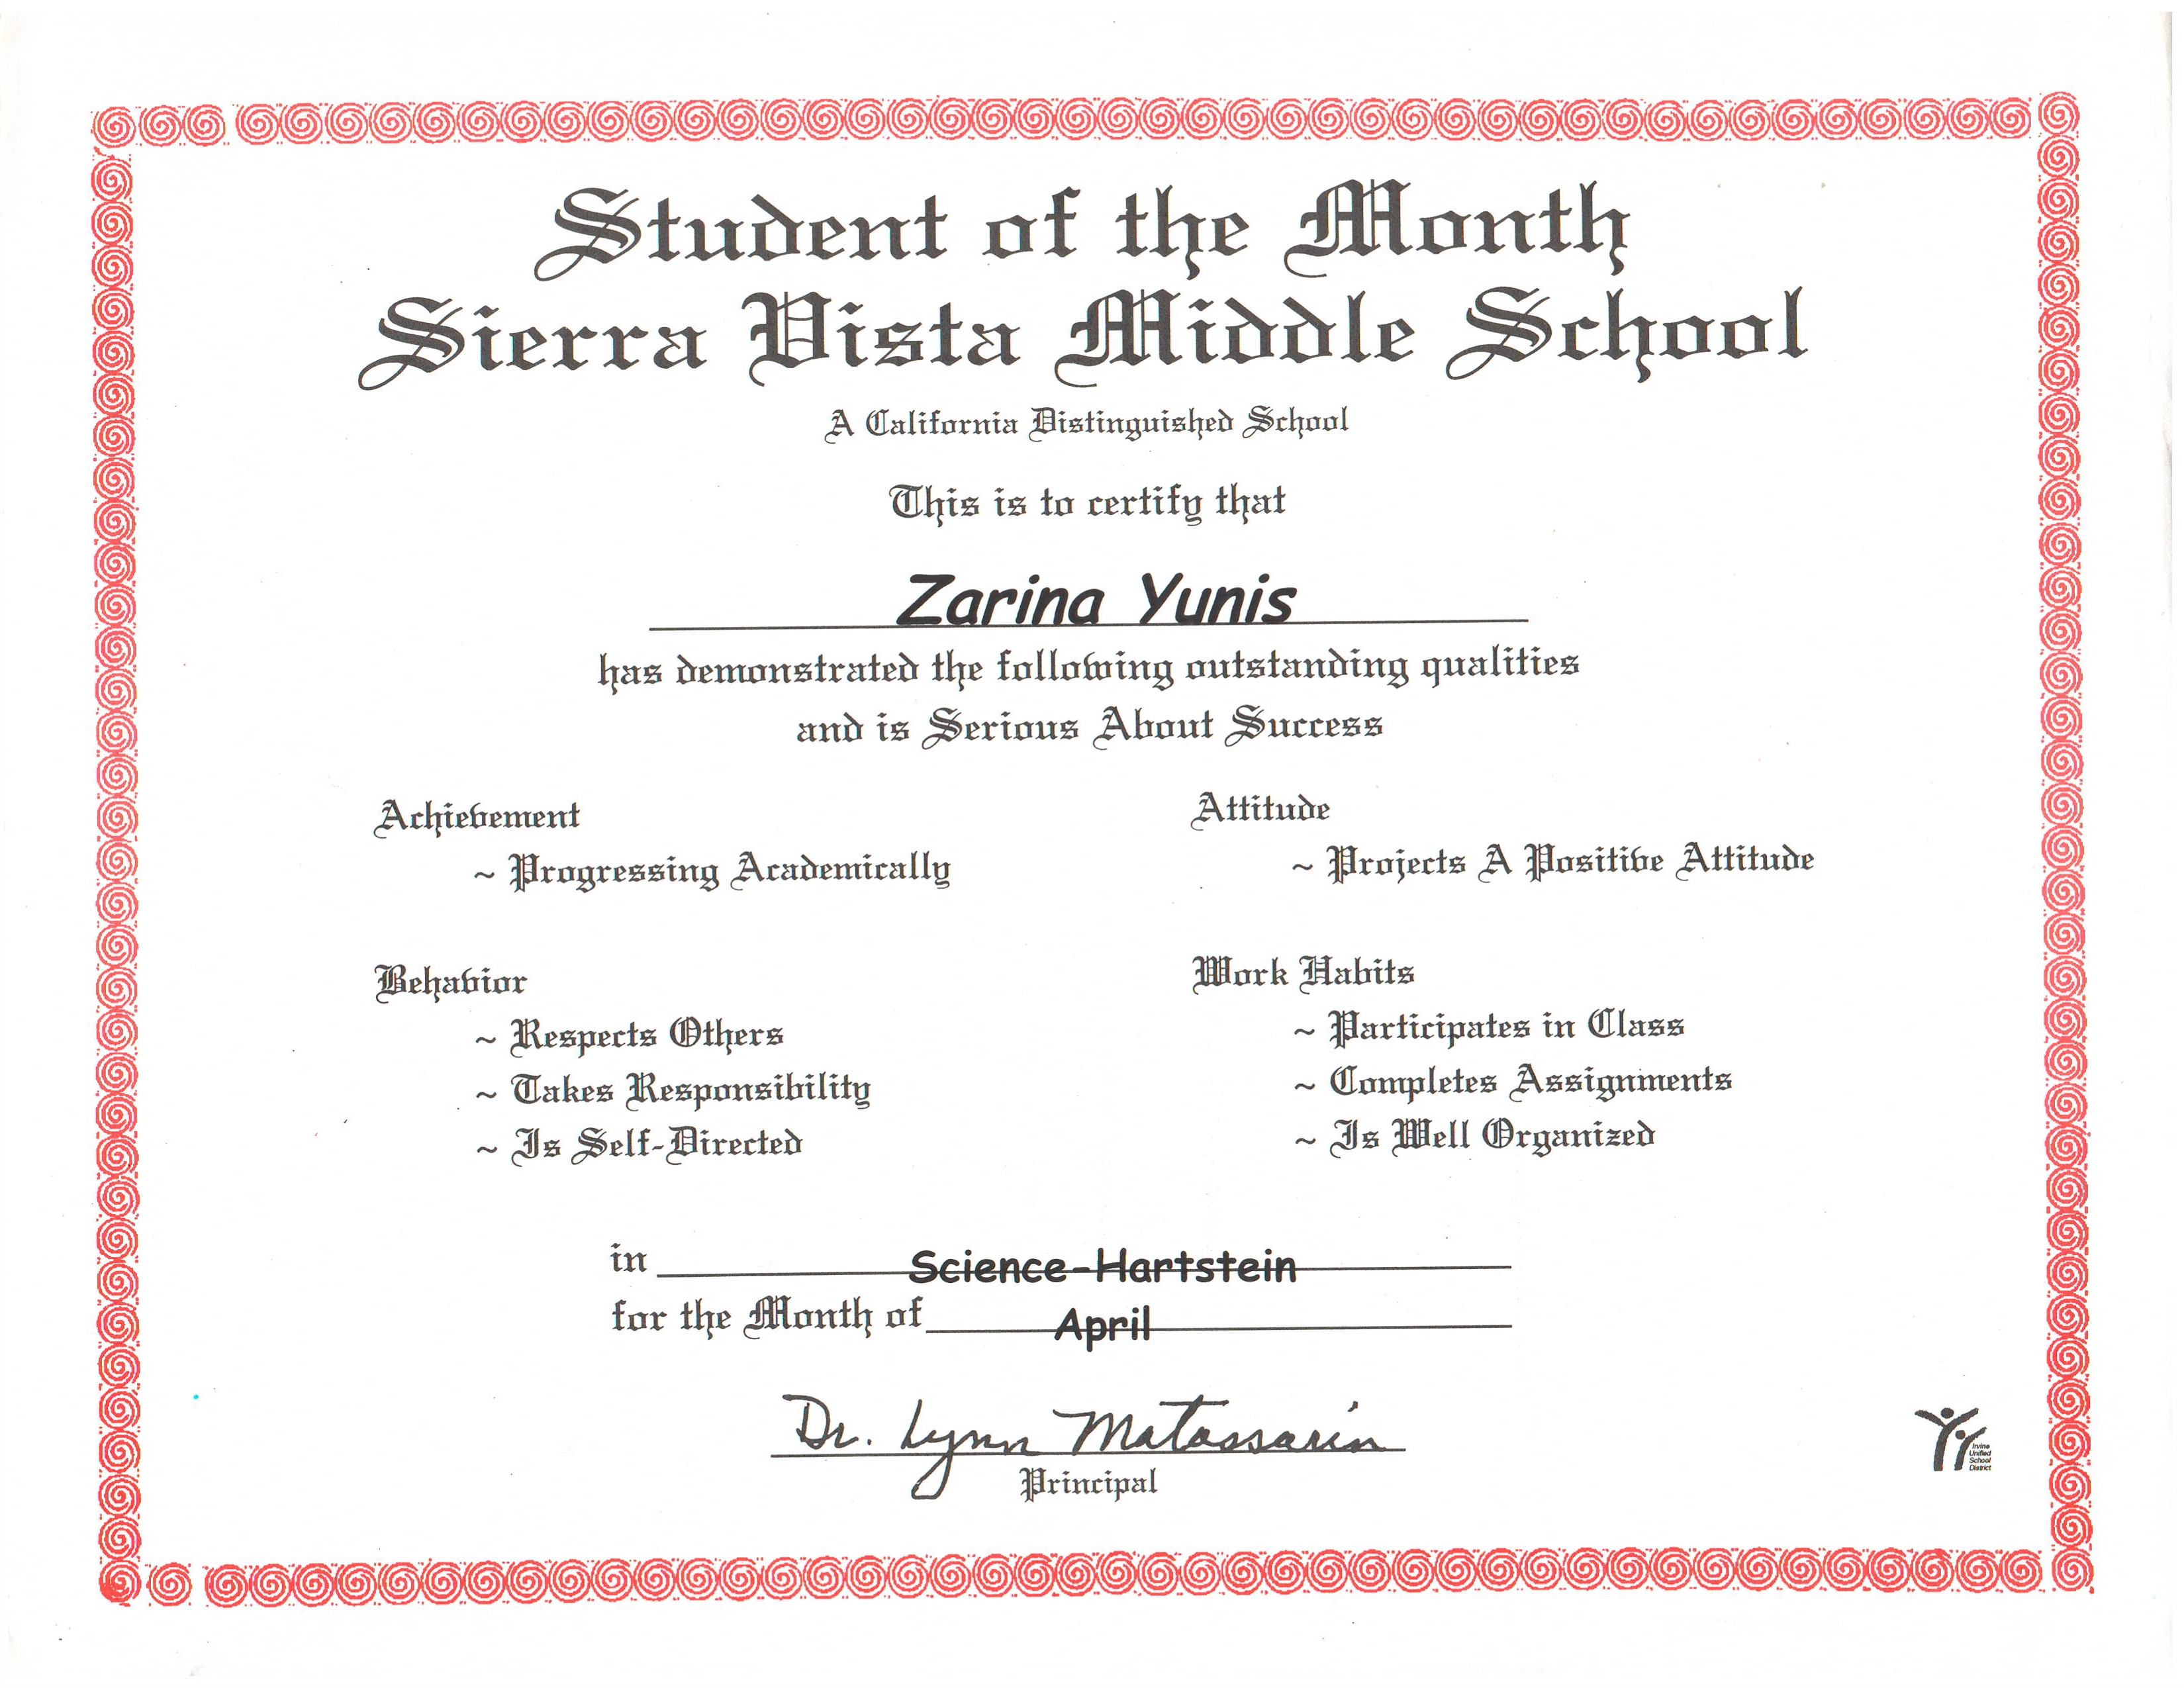 16.4.1 Student of the Month